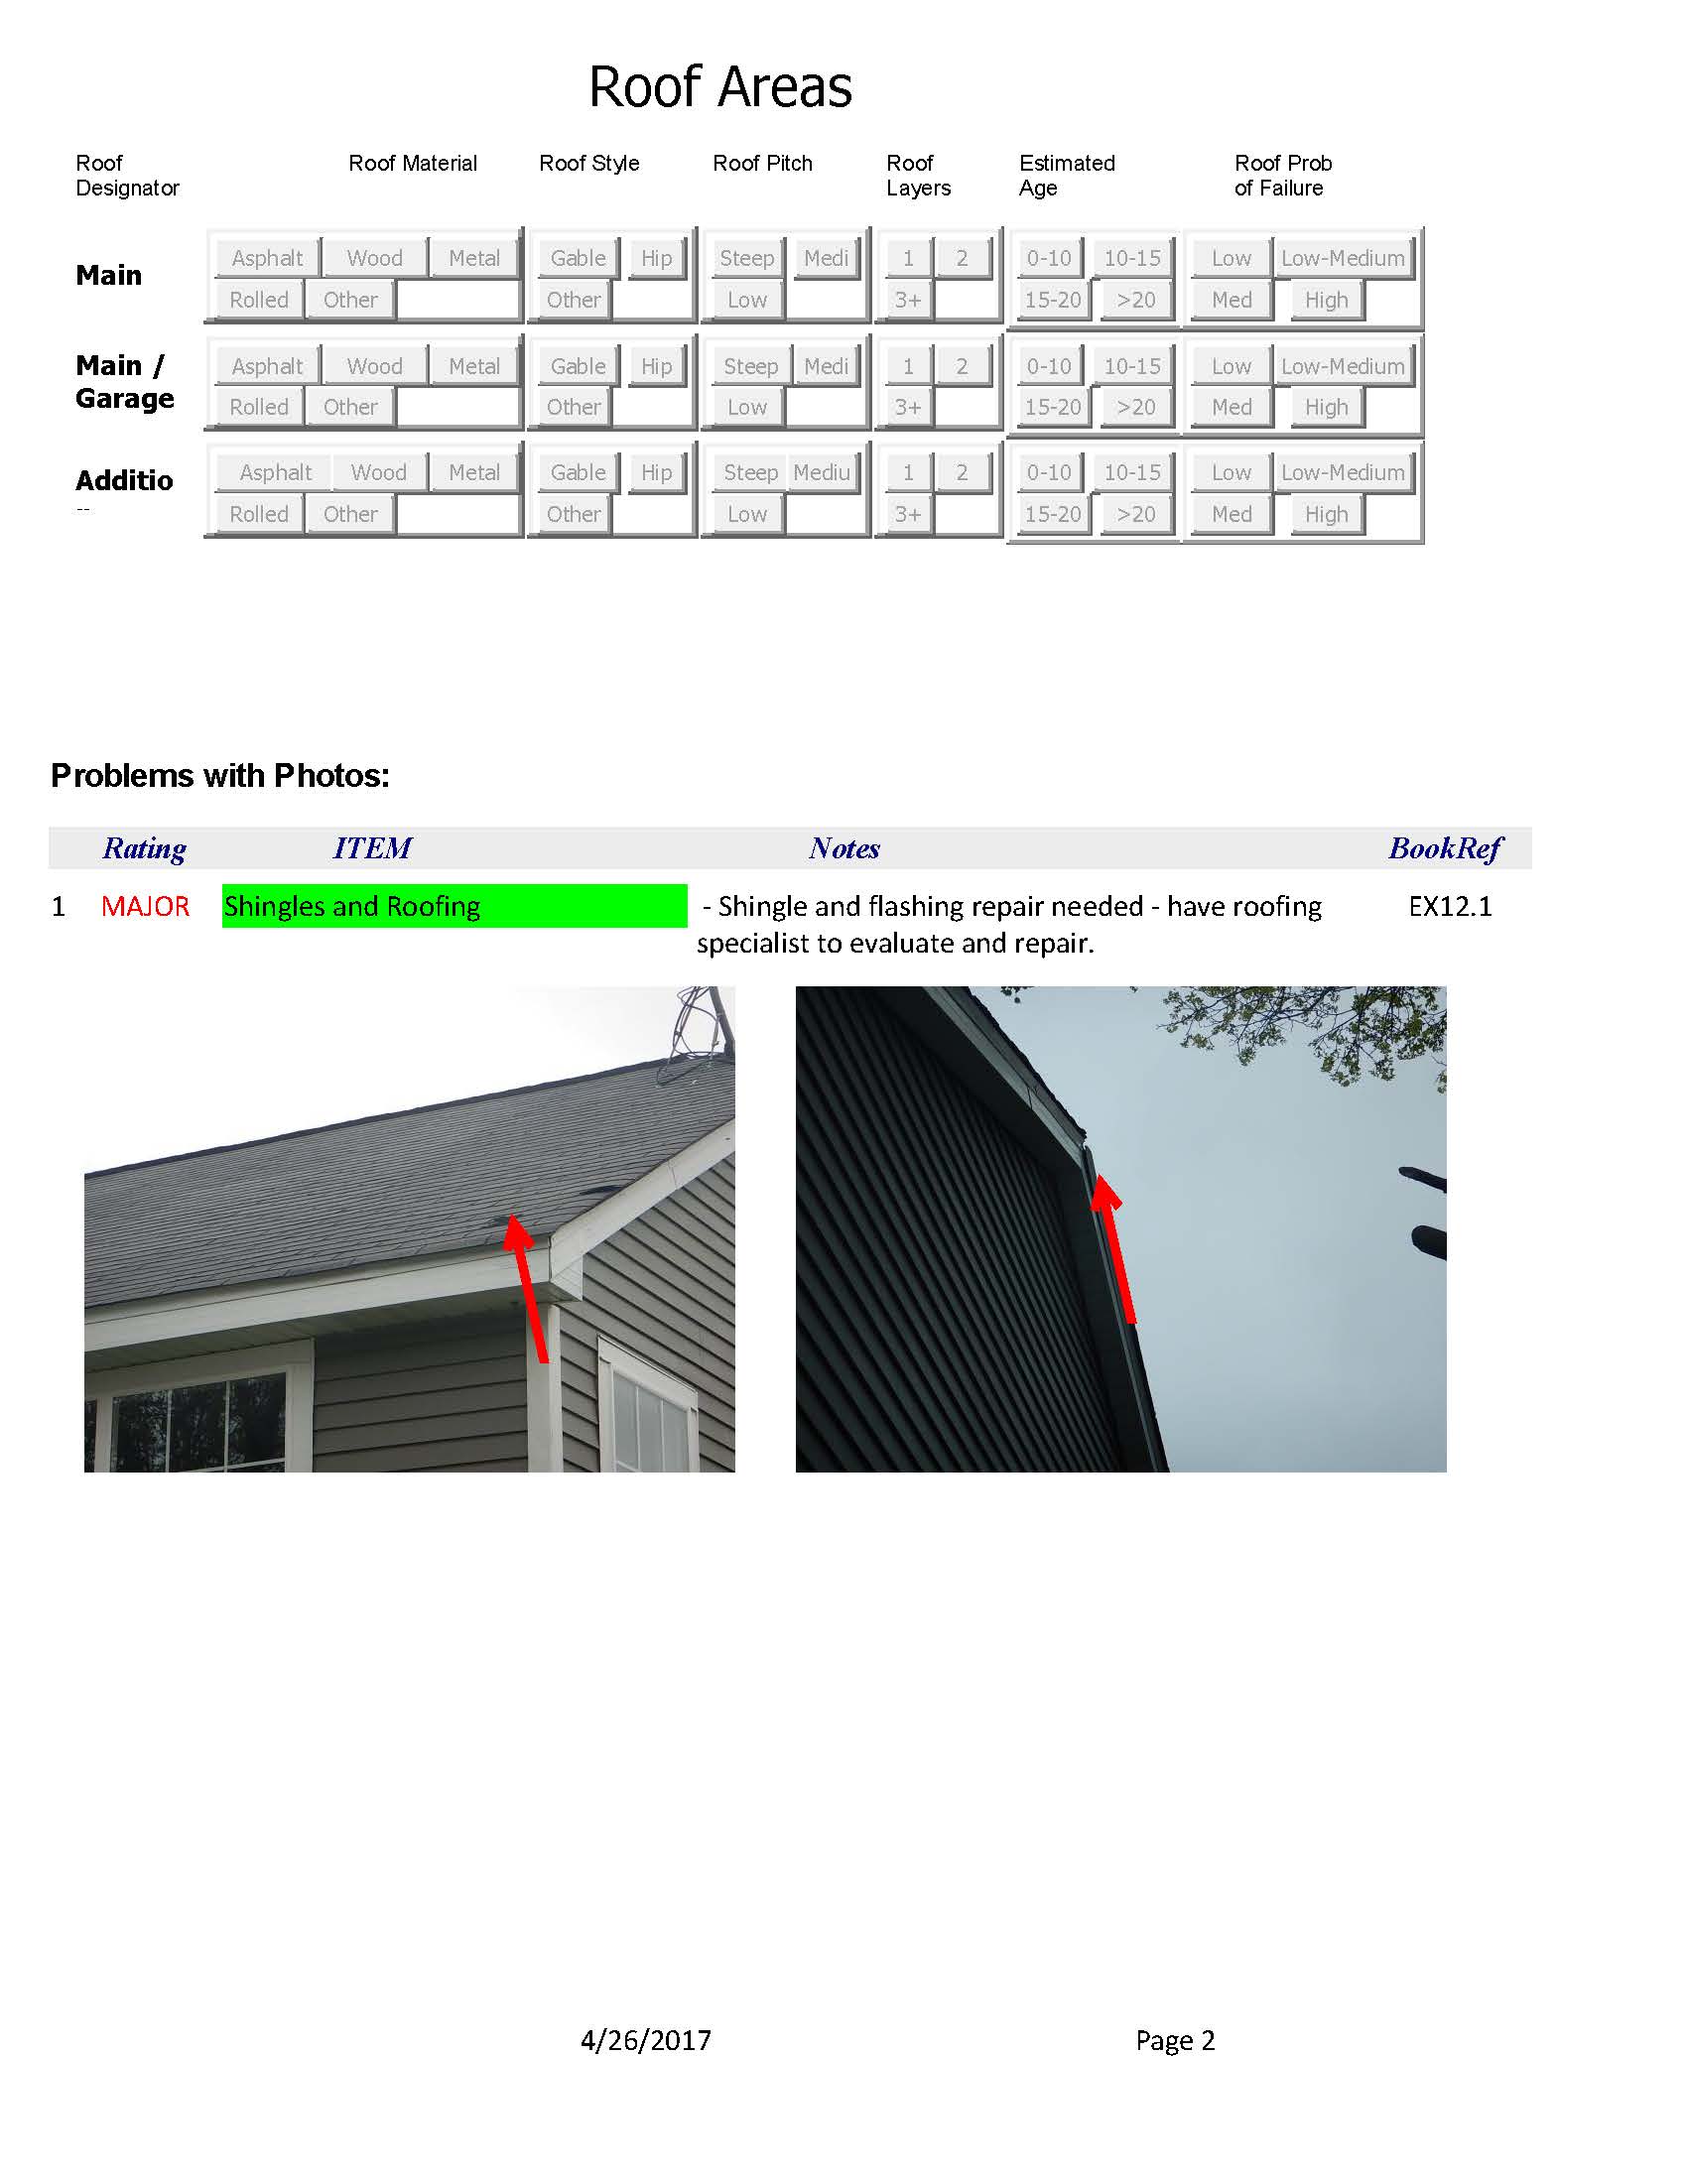 Single Family Example Report._Page_13.jpg